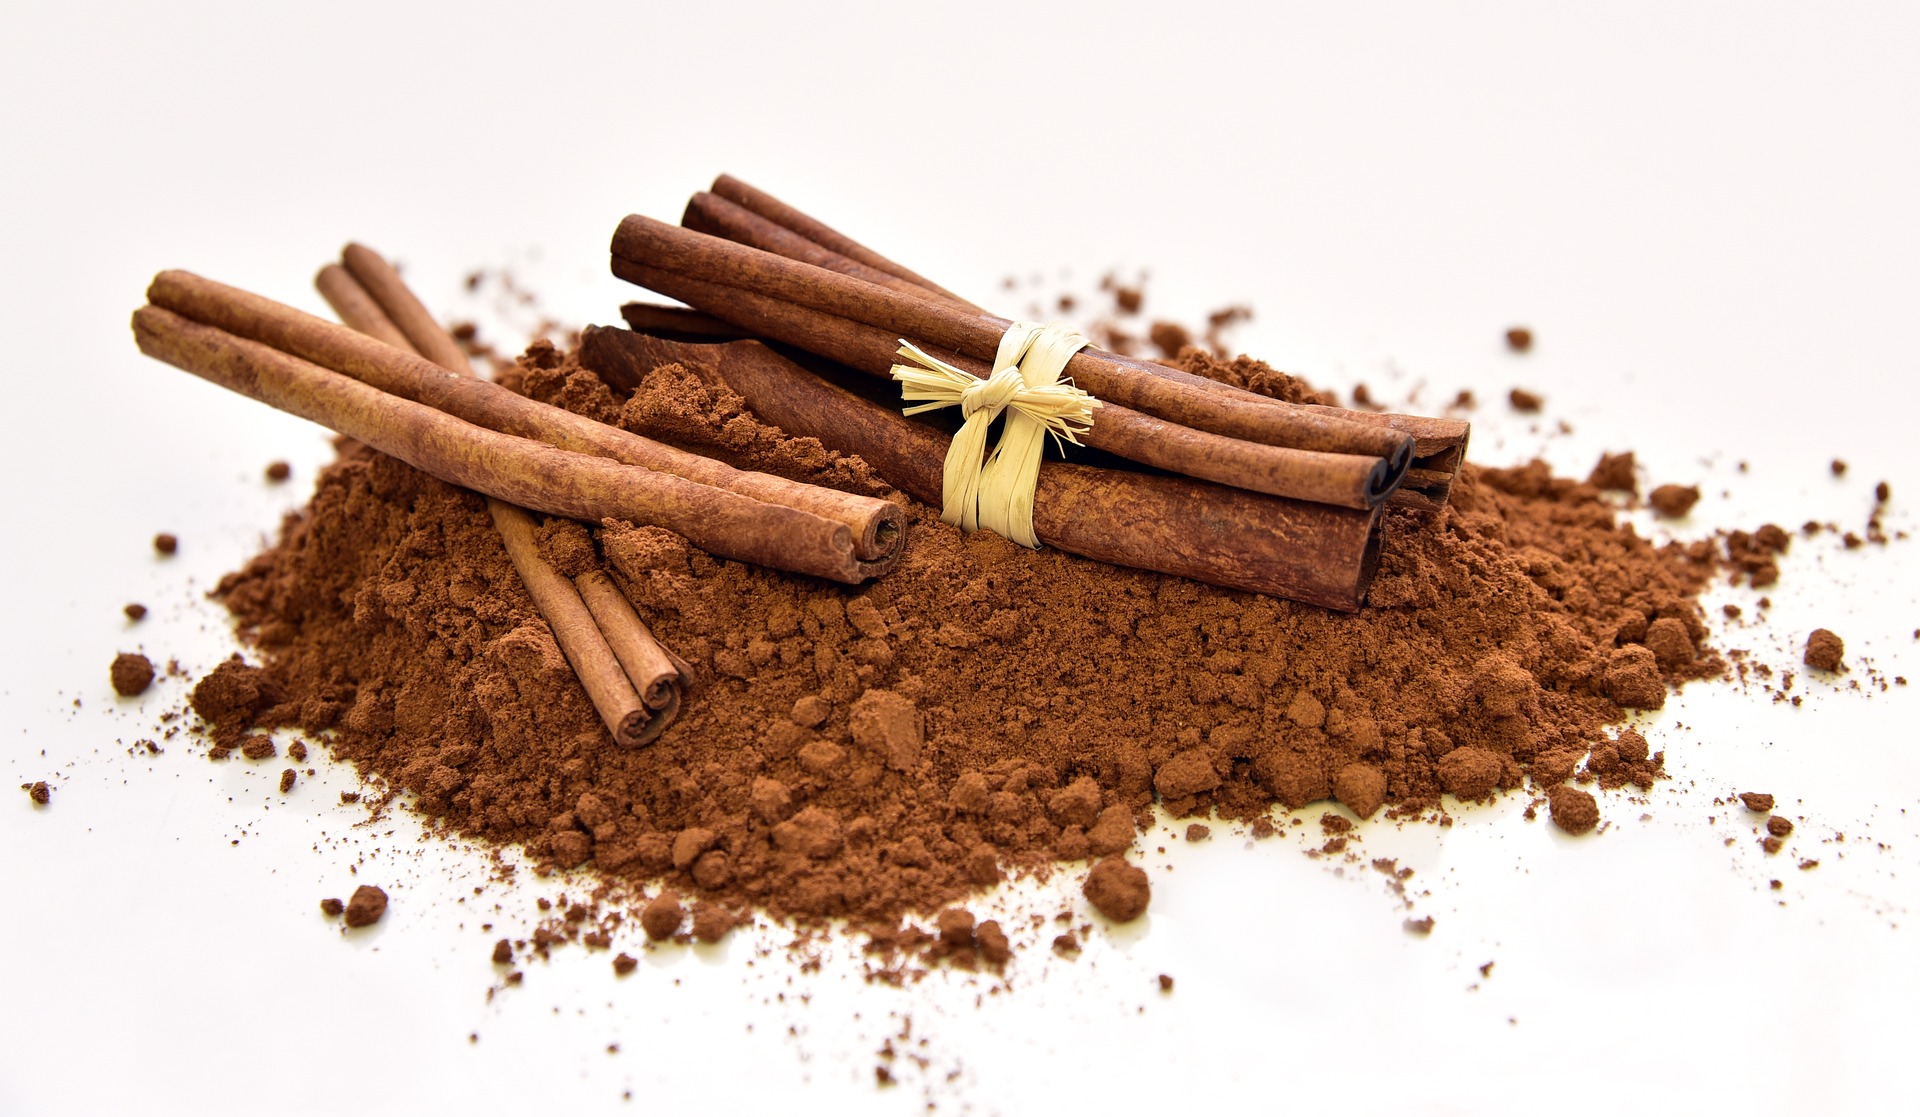 If you are 25 and single, you will be covered in cinnamon in Denmark